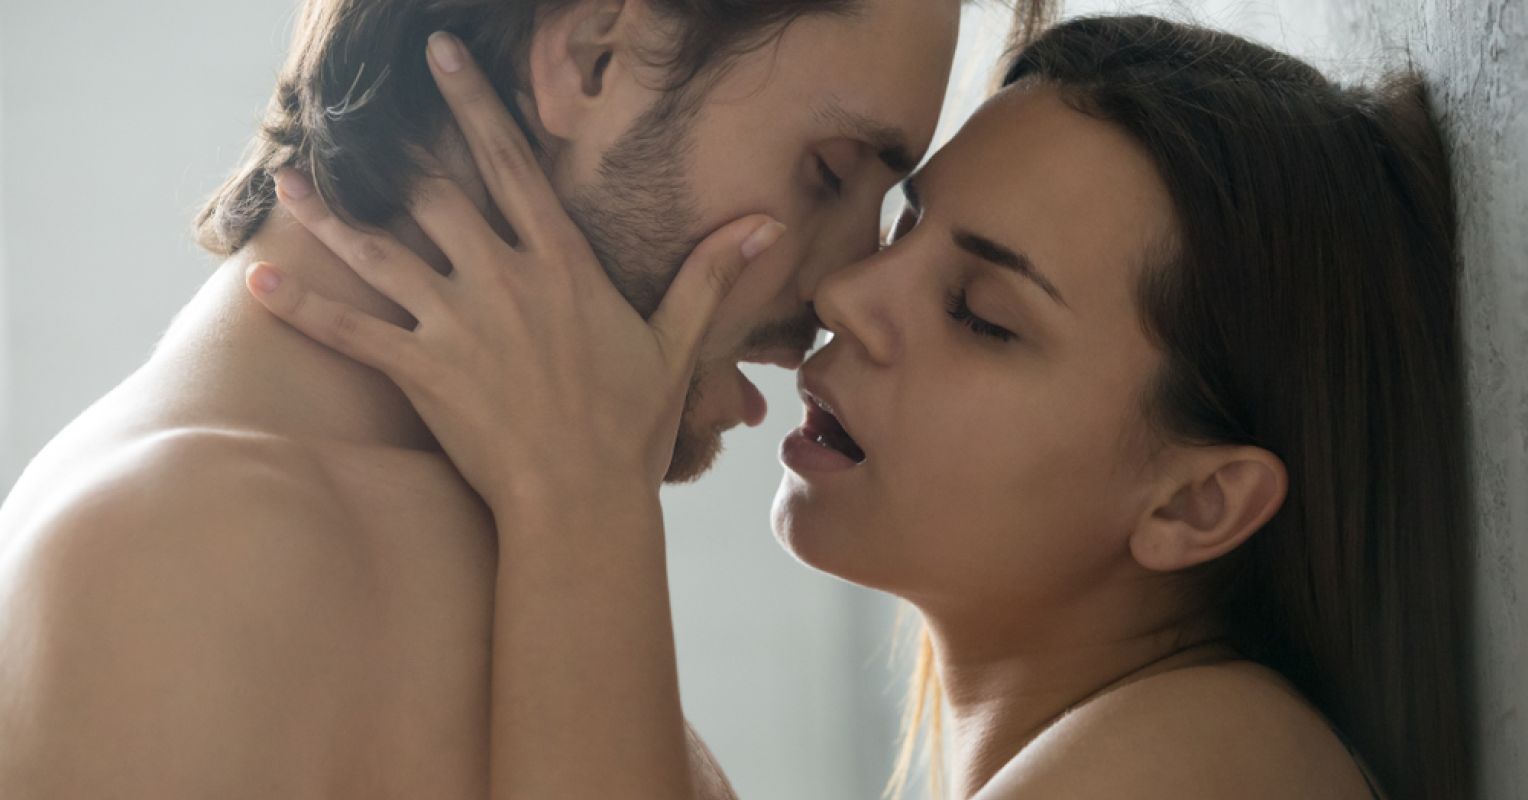 Why We Scream and Moan During Sex Psychology Today picture image